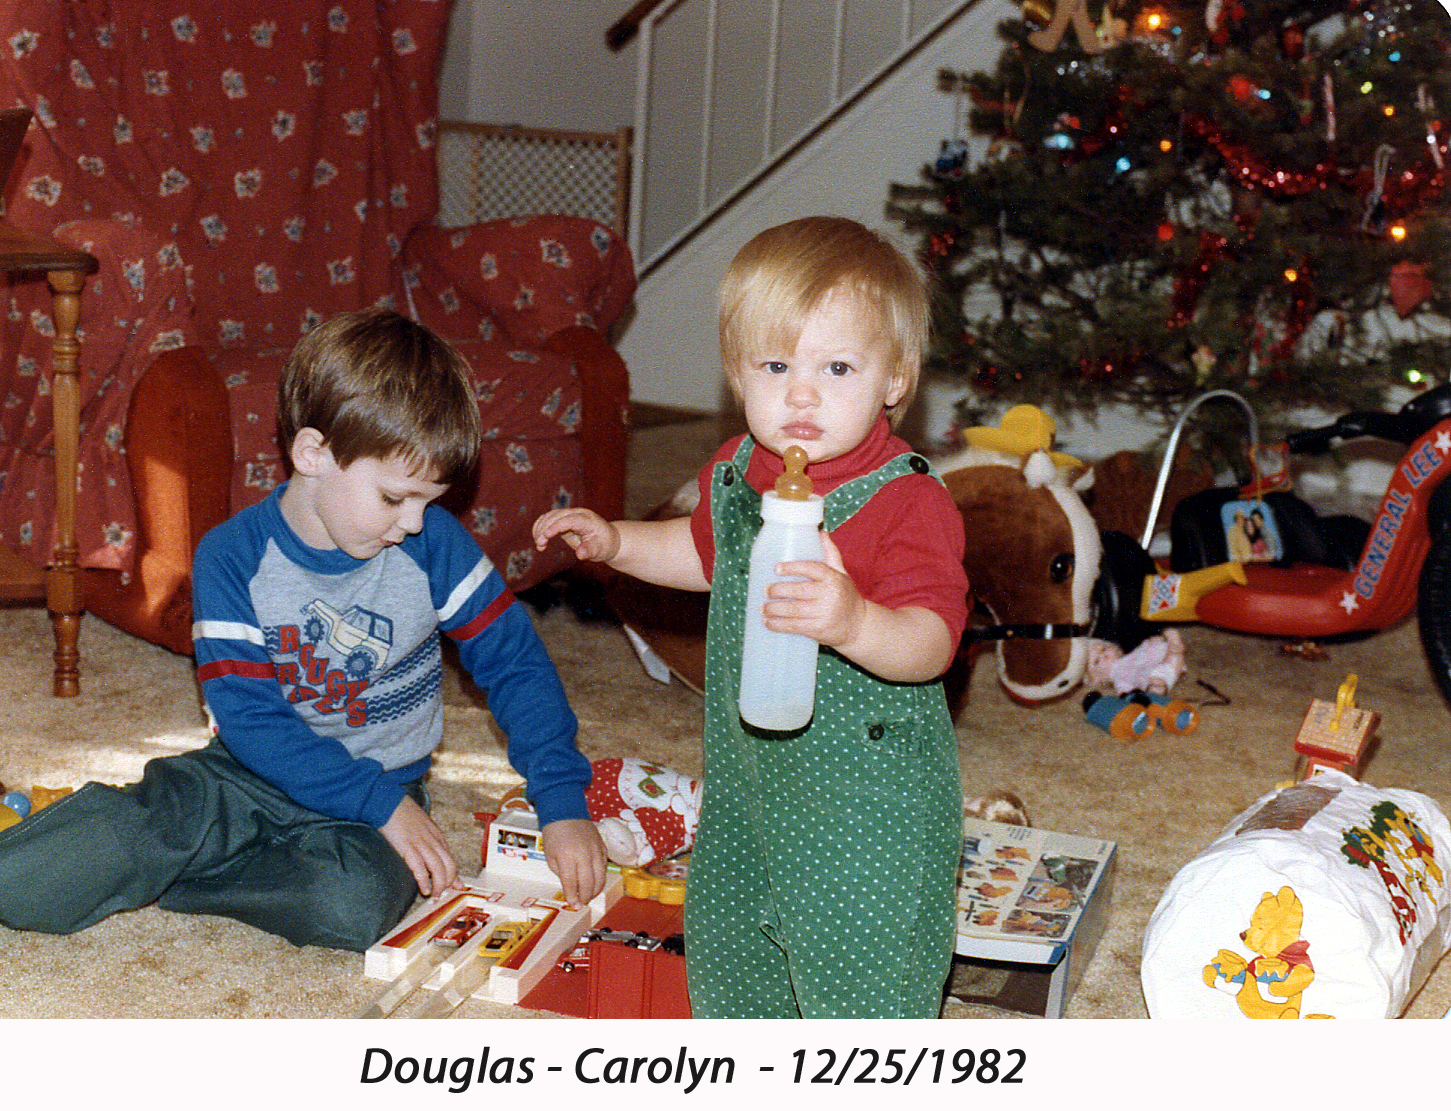 Doug and CJ on Christmas 1982 with their presents in front of the tree